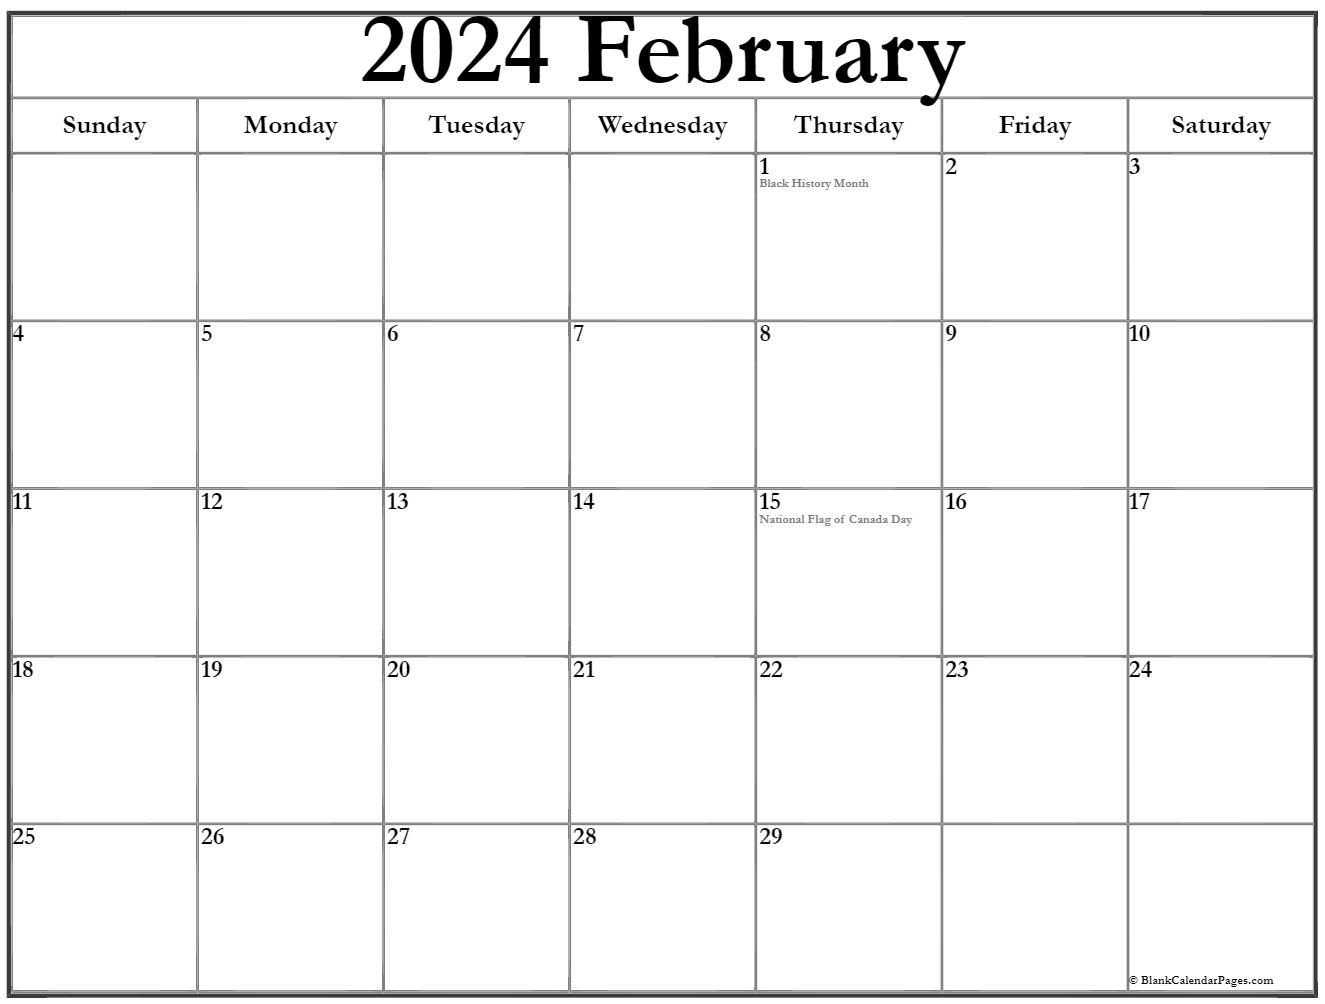 Collection Of February 2020 Calendars With Holidays